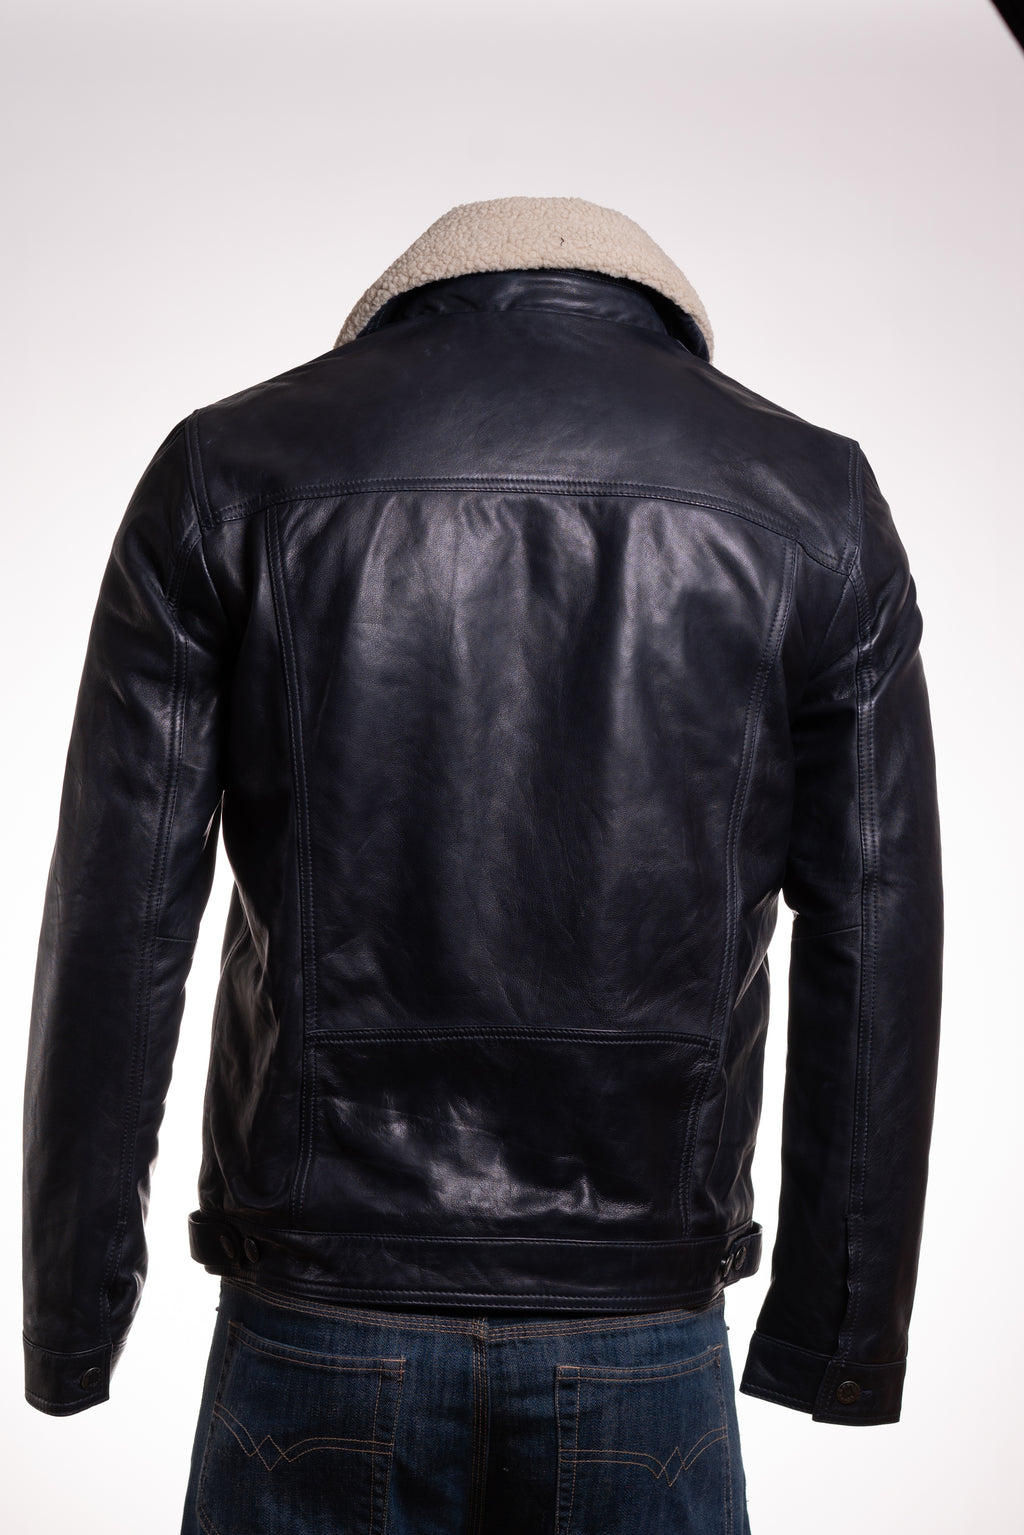 Men's Navy Shirt Style Leather Jacket With Removable Sheepskin Collar: Gabriele